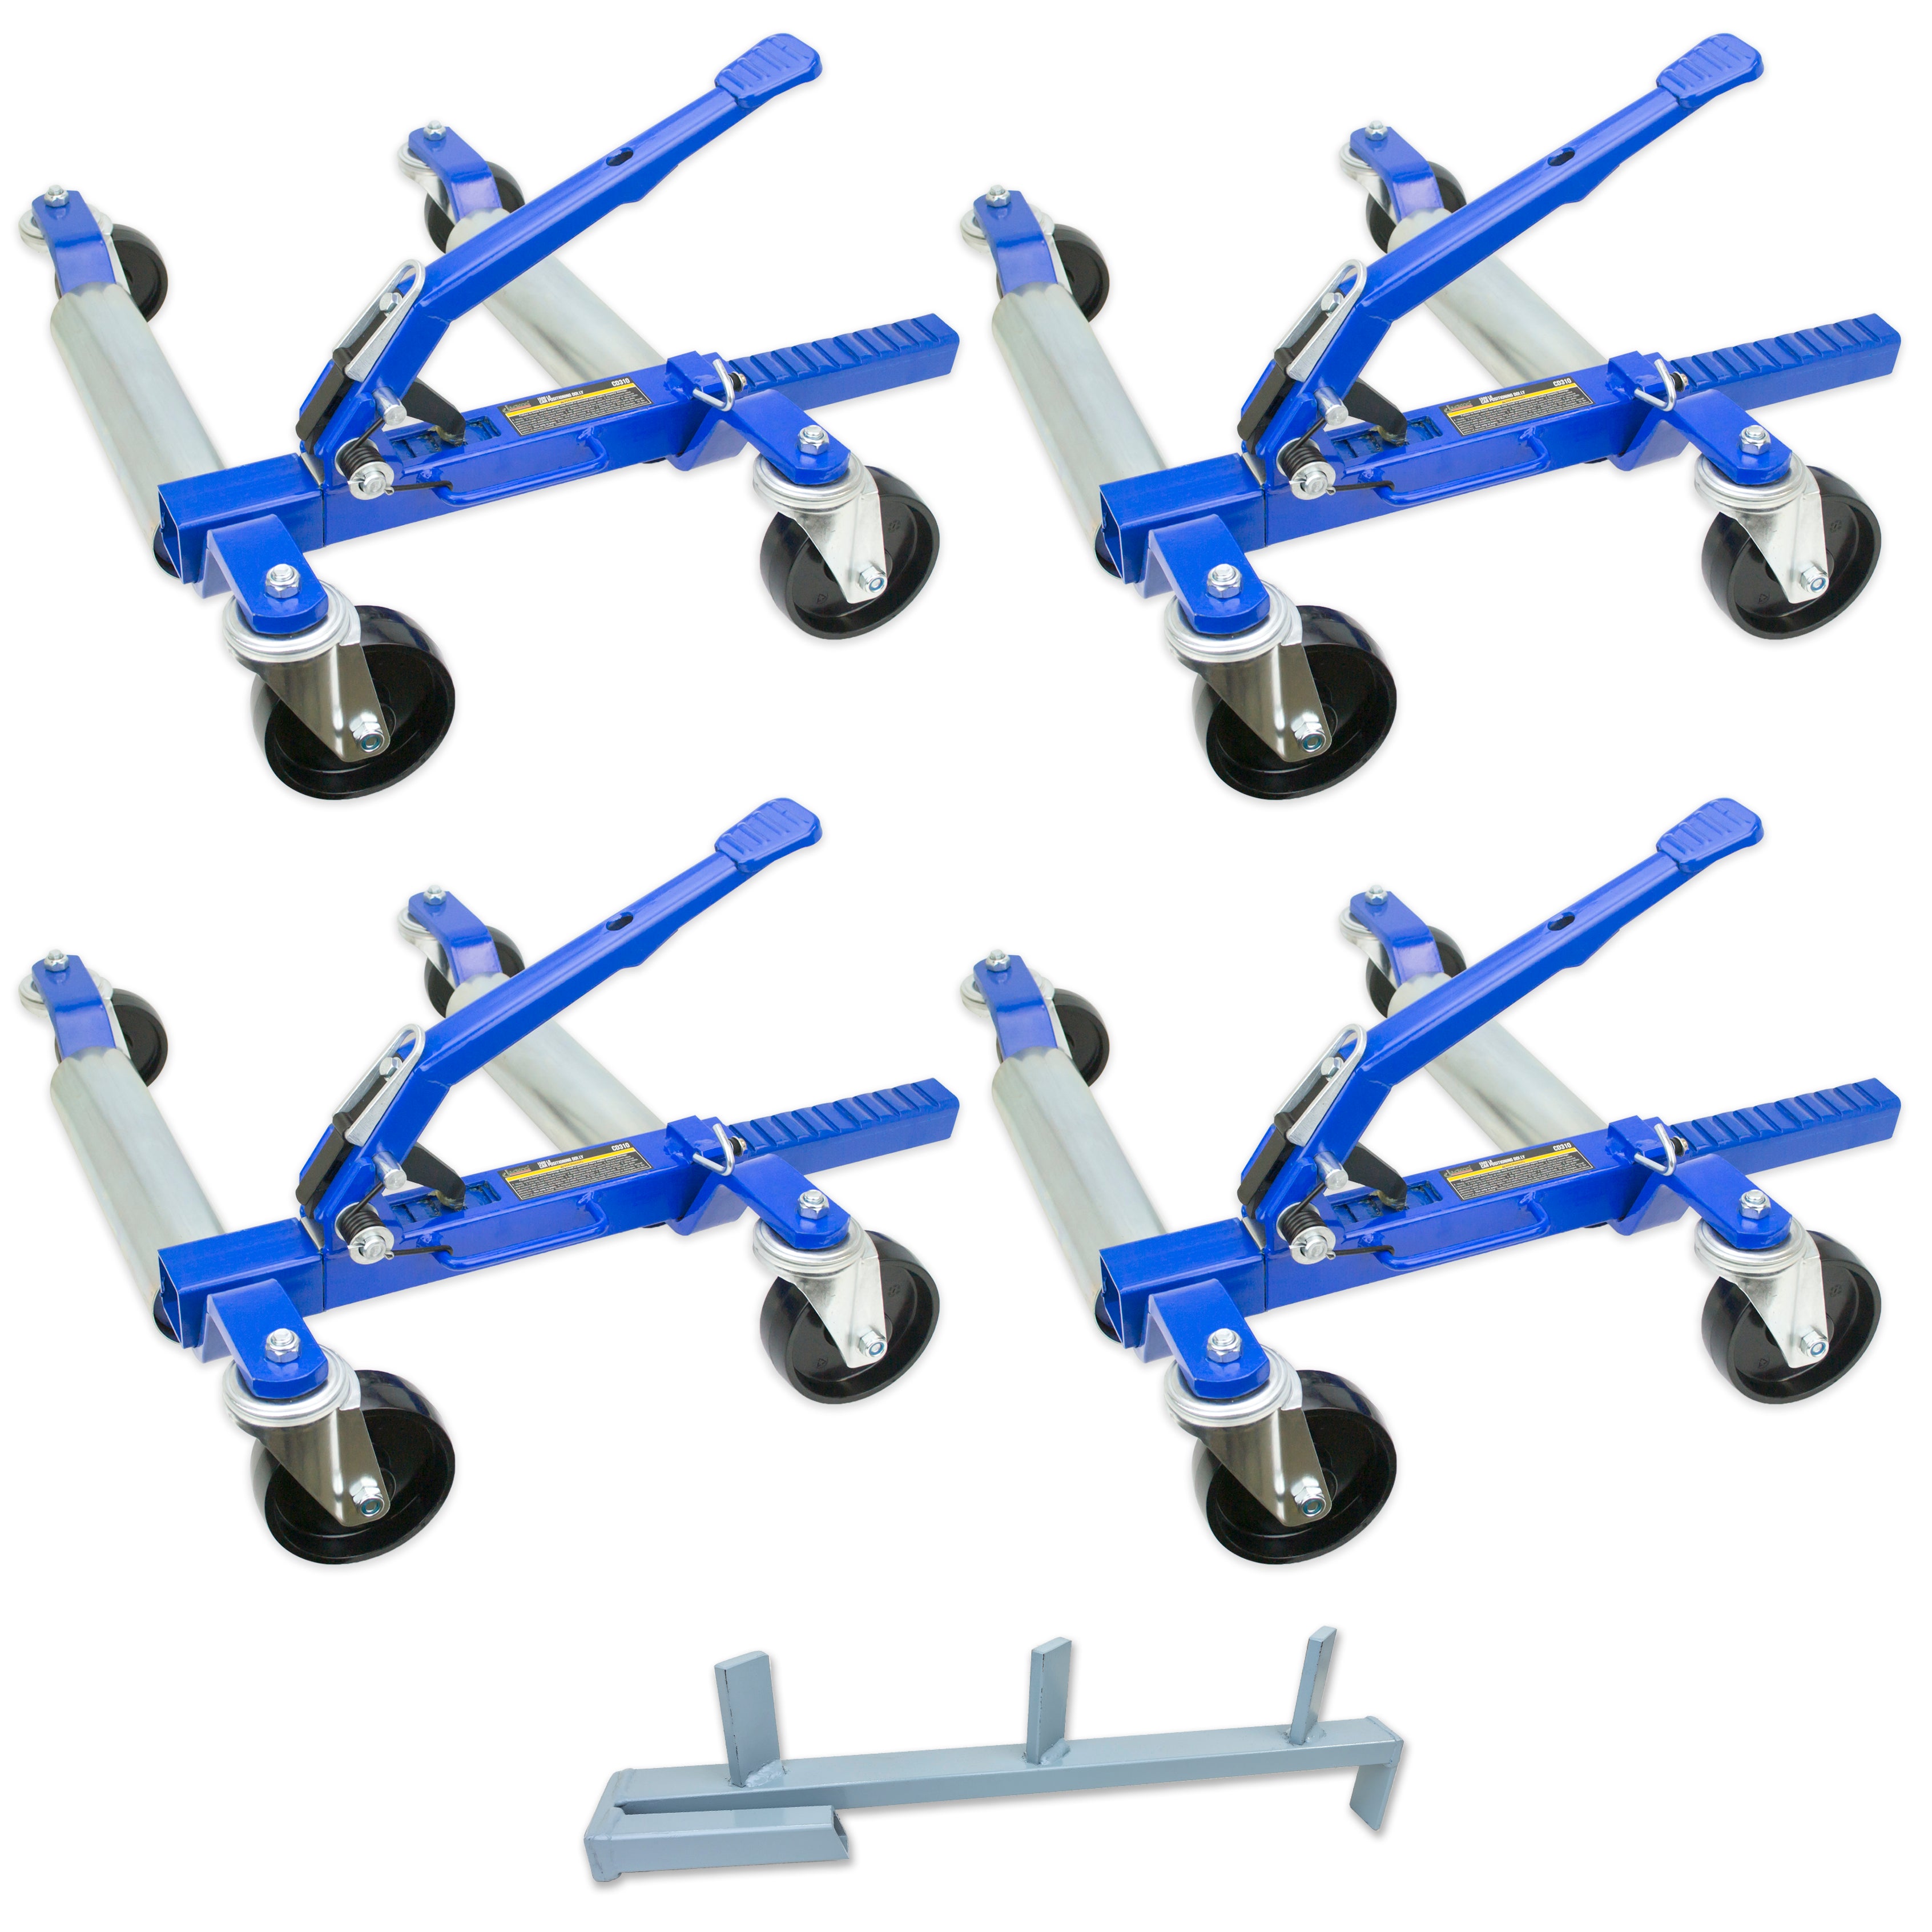 Jackco 1500 LB 12.5” Wheel Car Positioning Dolly (4 Pack with Stand)